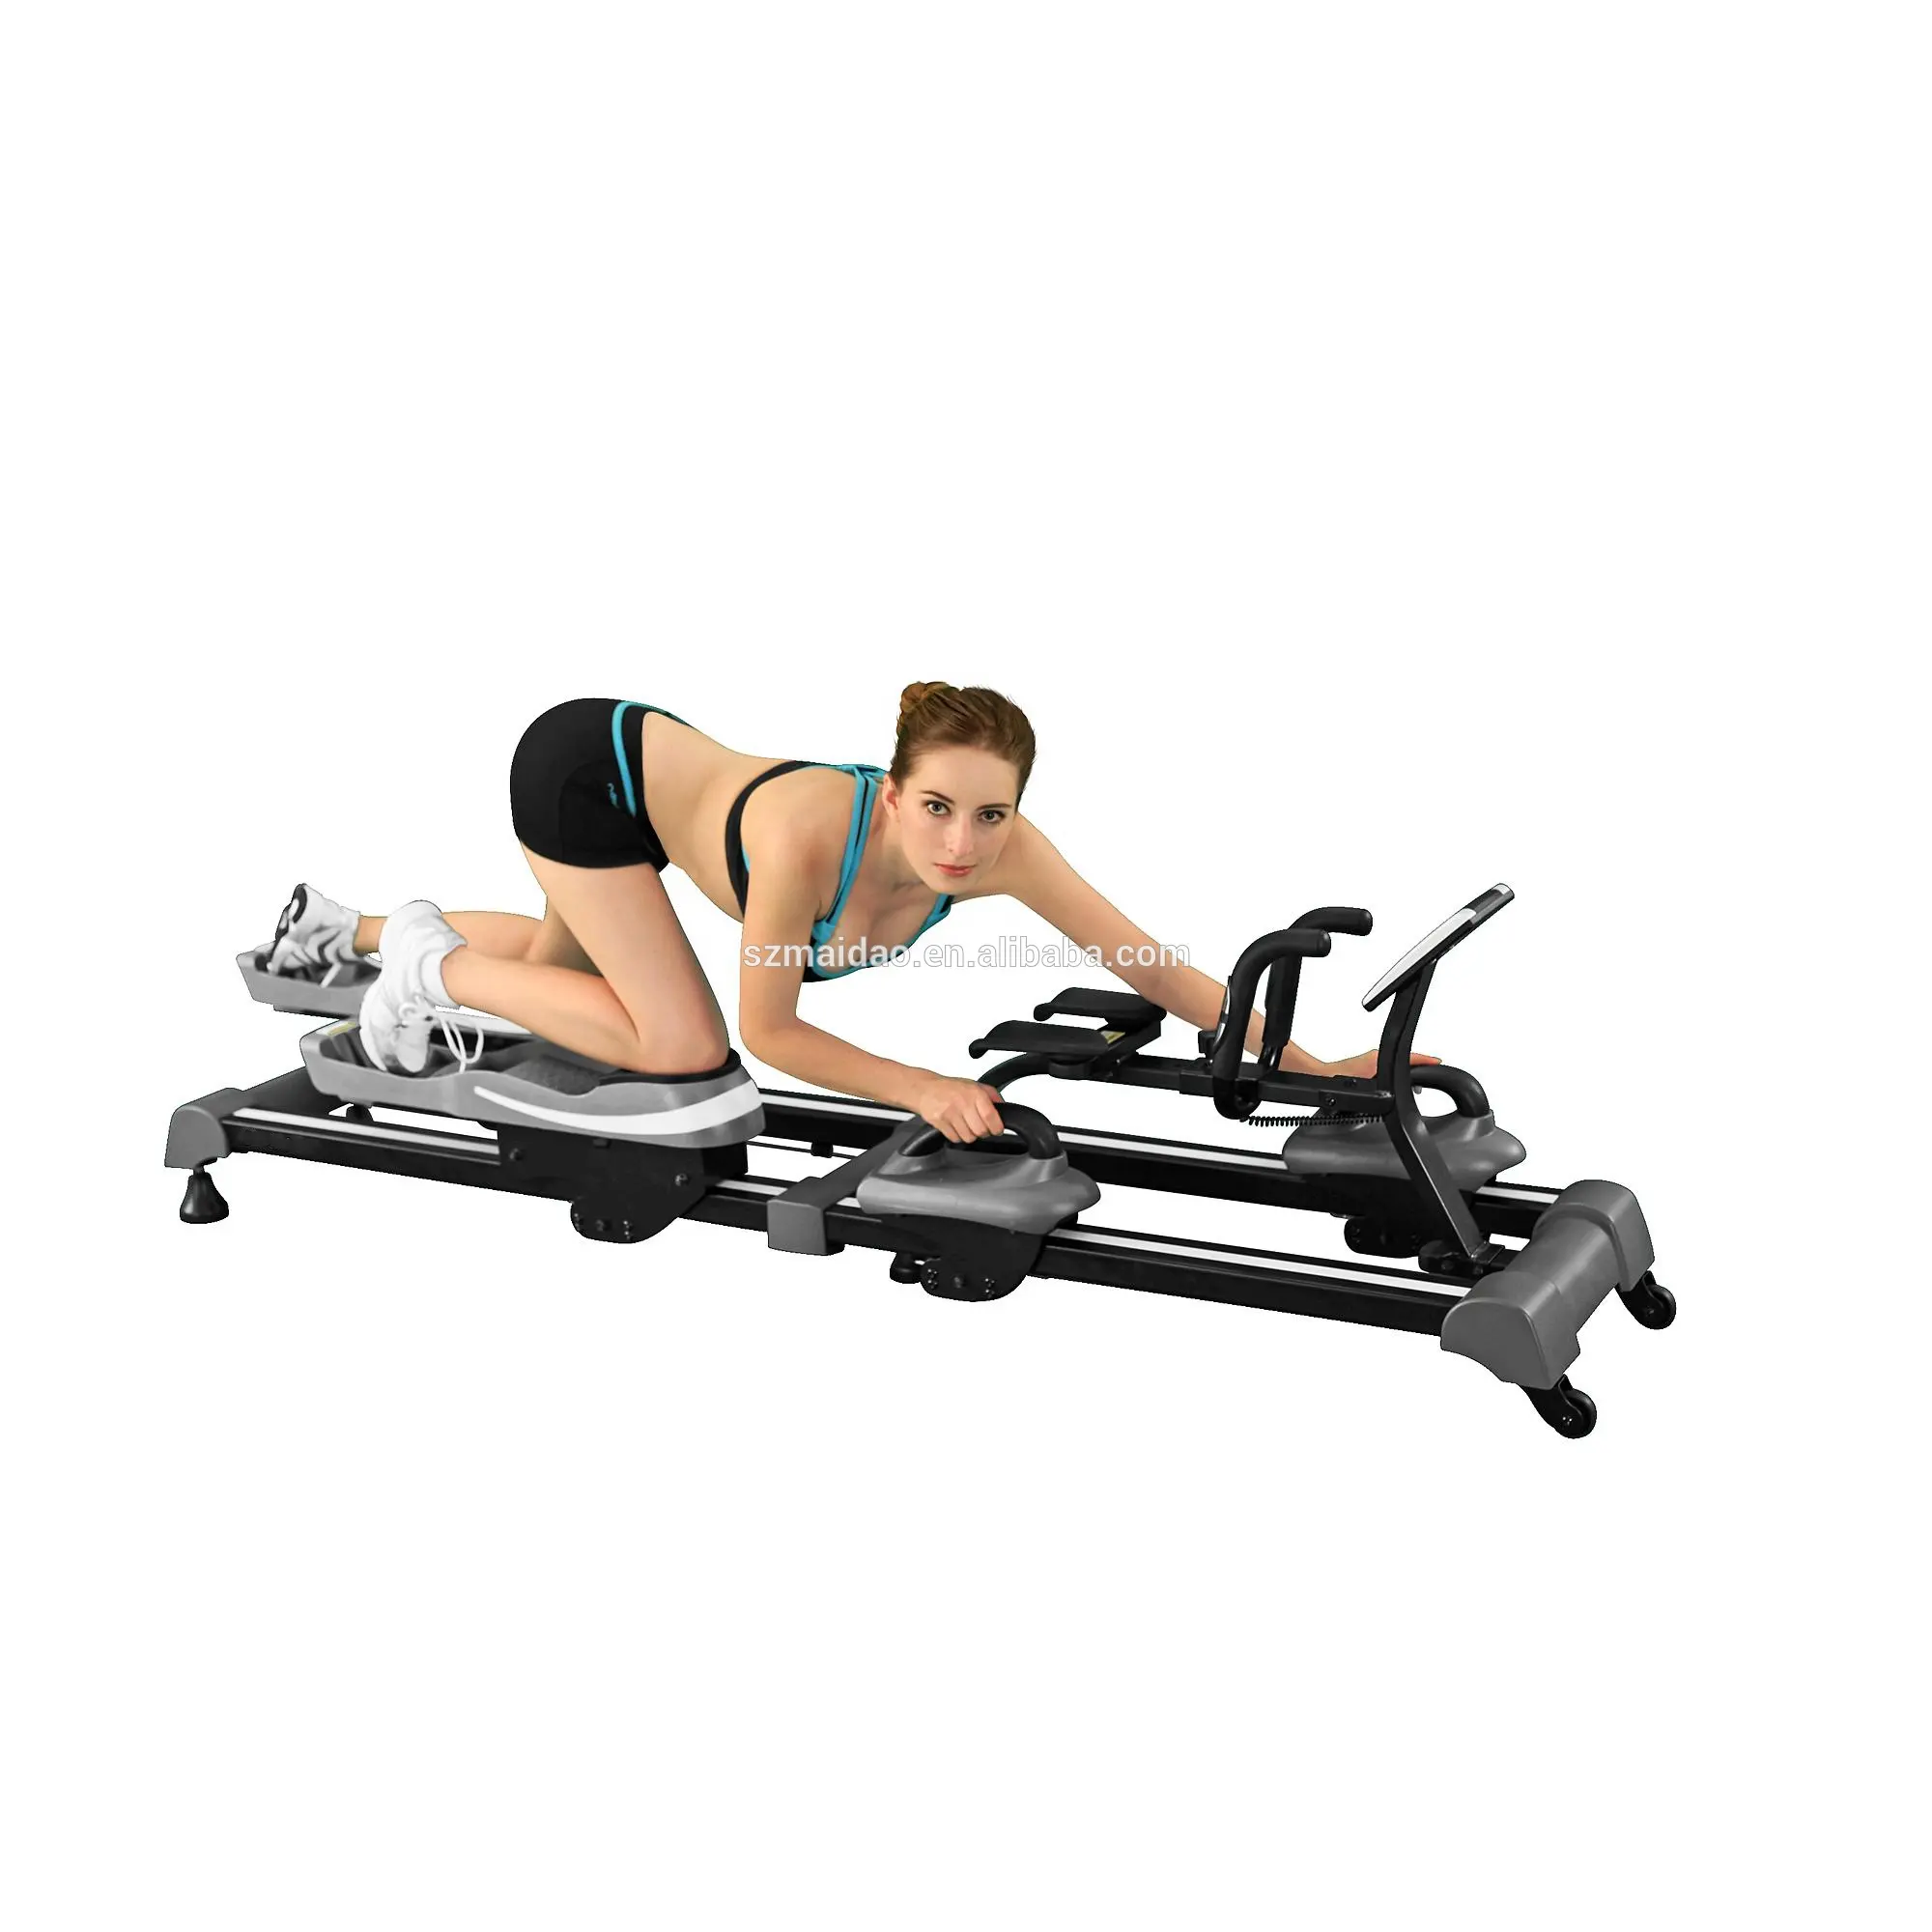 New Fitness Multi Gym Equipment Climb Crawl Exercise Machine for Total Body Training with LCD Monitor